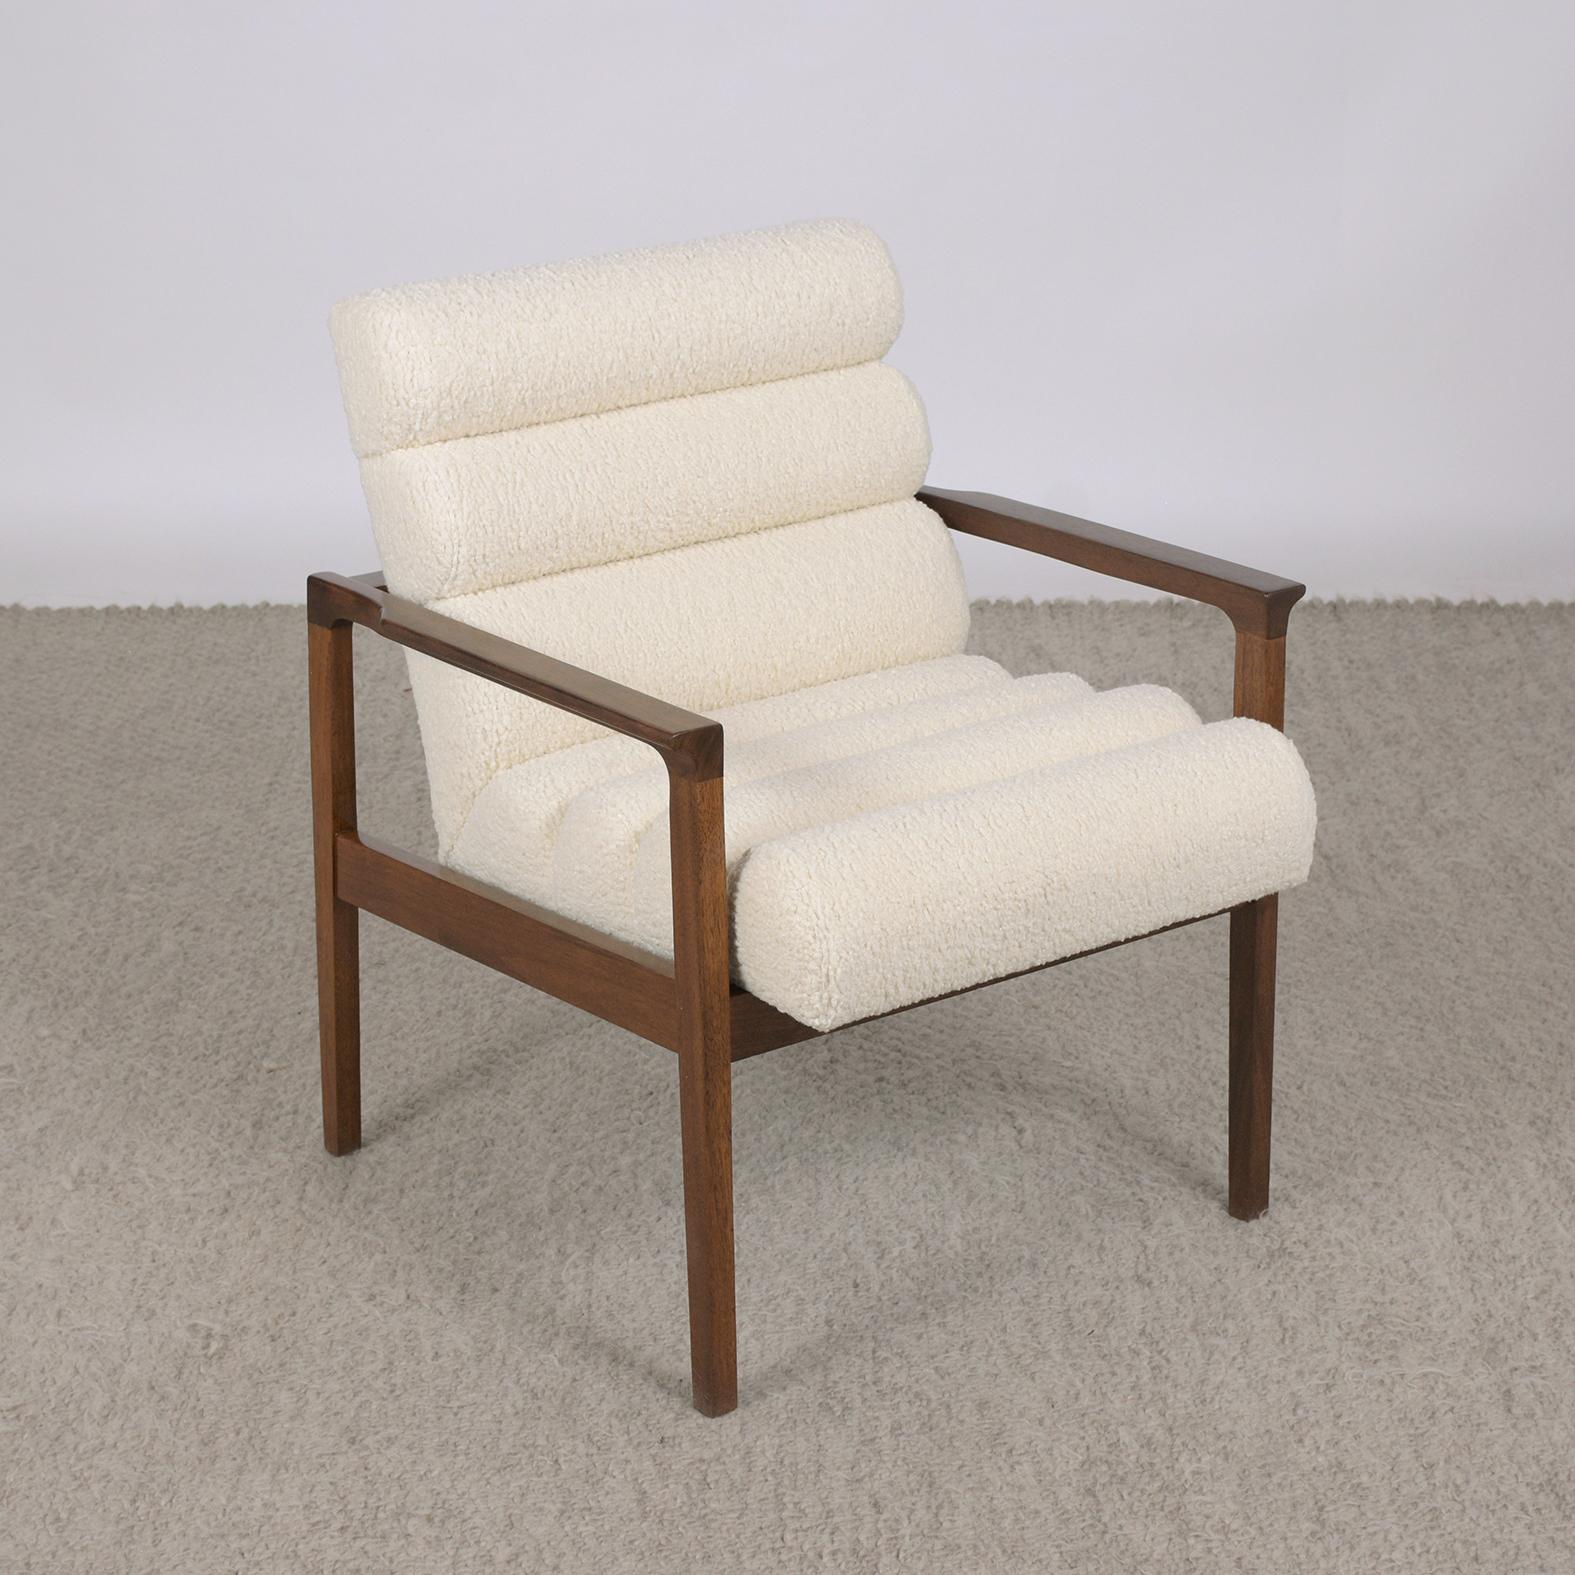 Wood Vintage 1960s Pair of Mid-Century Modern Lounge Chairs